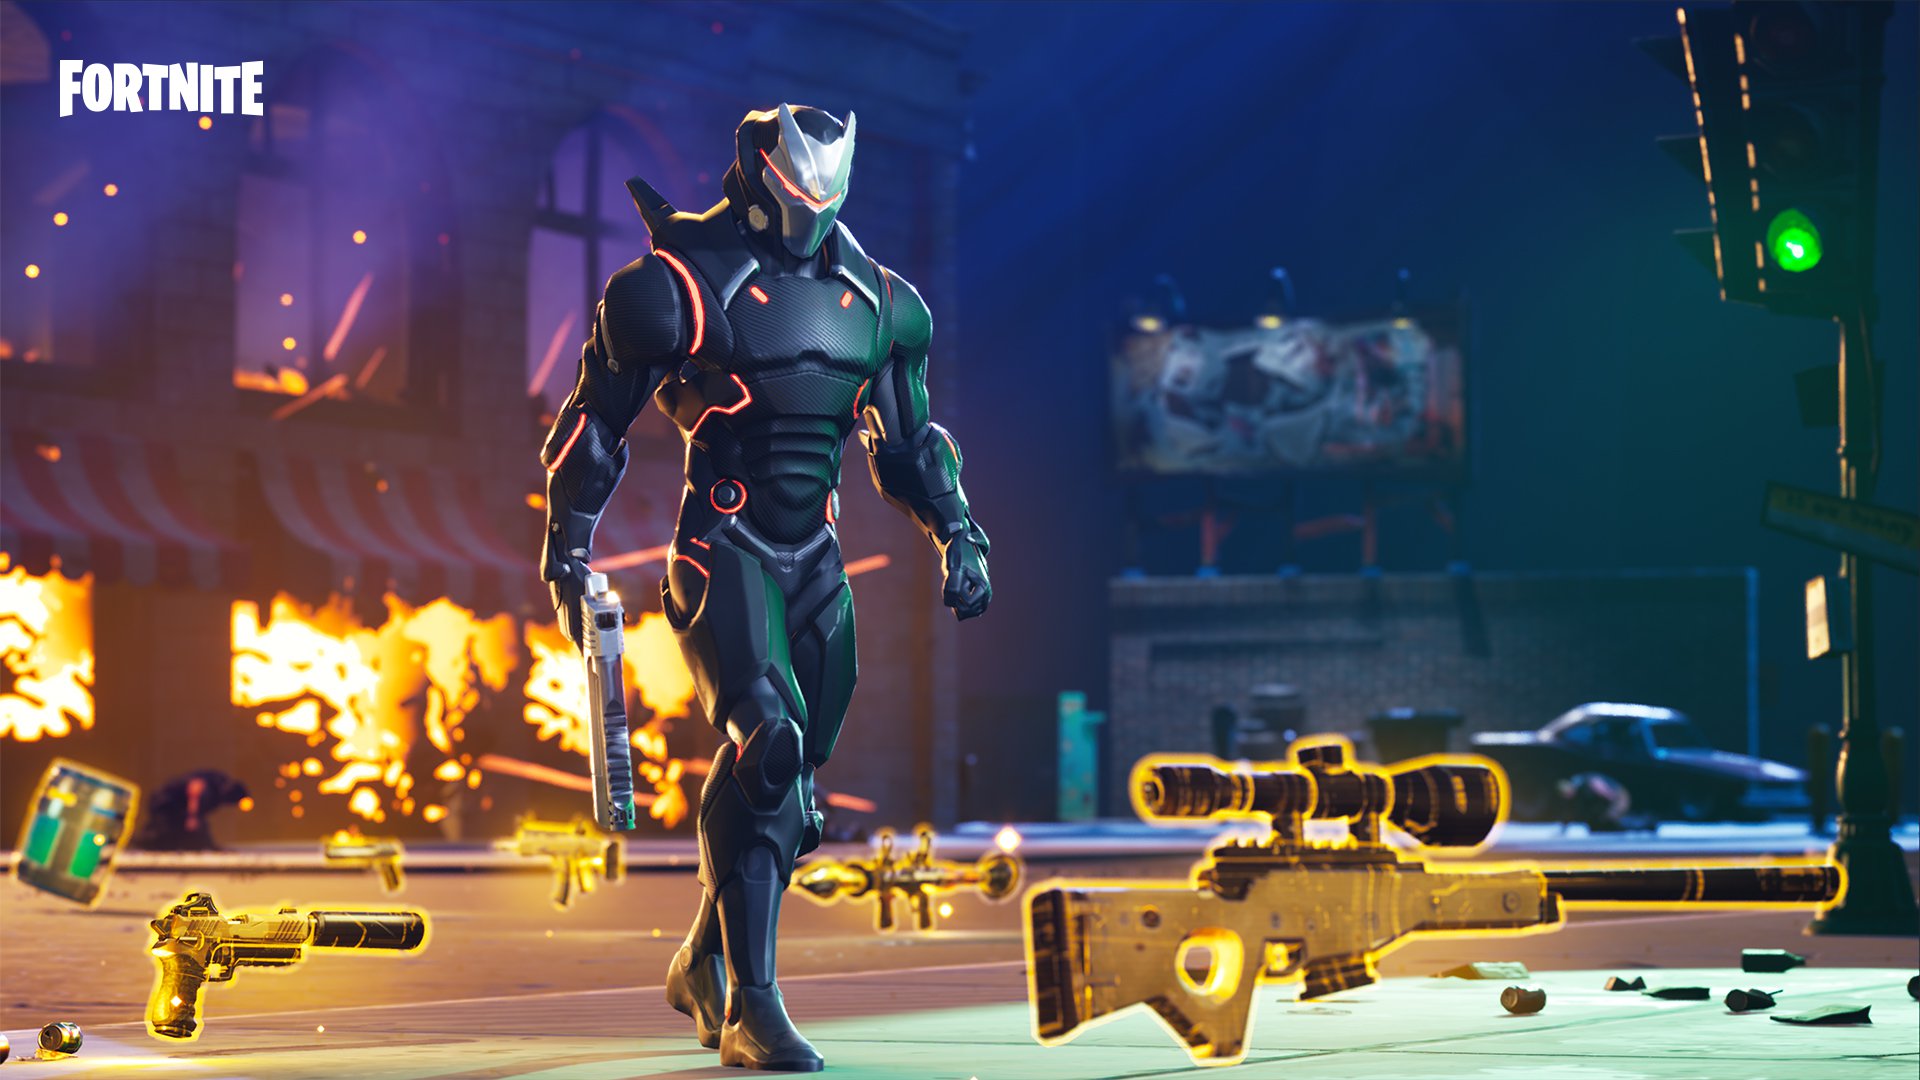 Fortnite Themed Xbox Bundle Drops From The Battle Bus